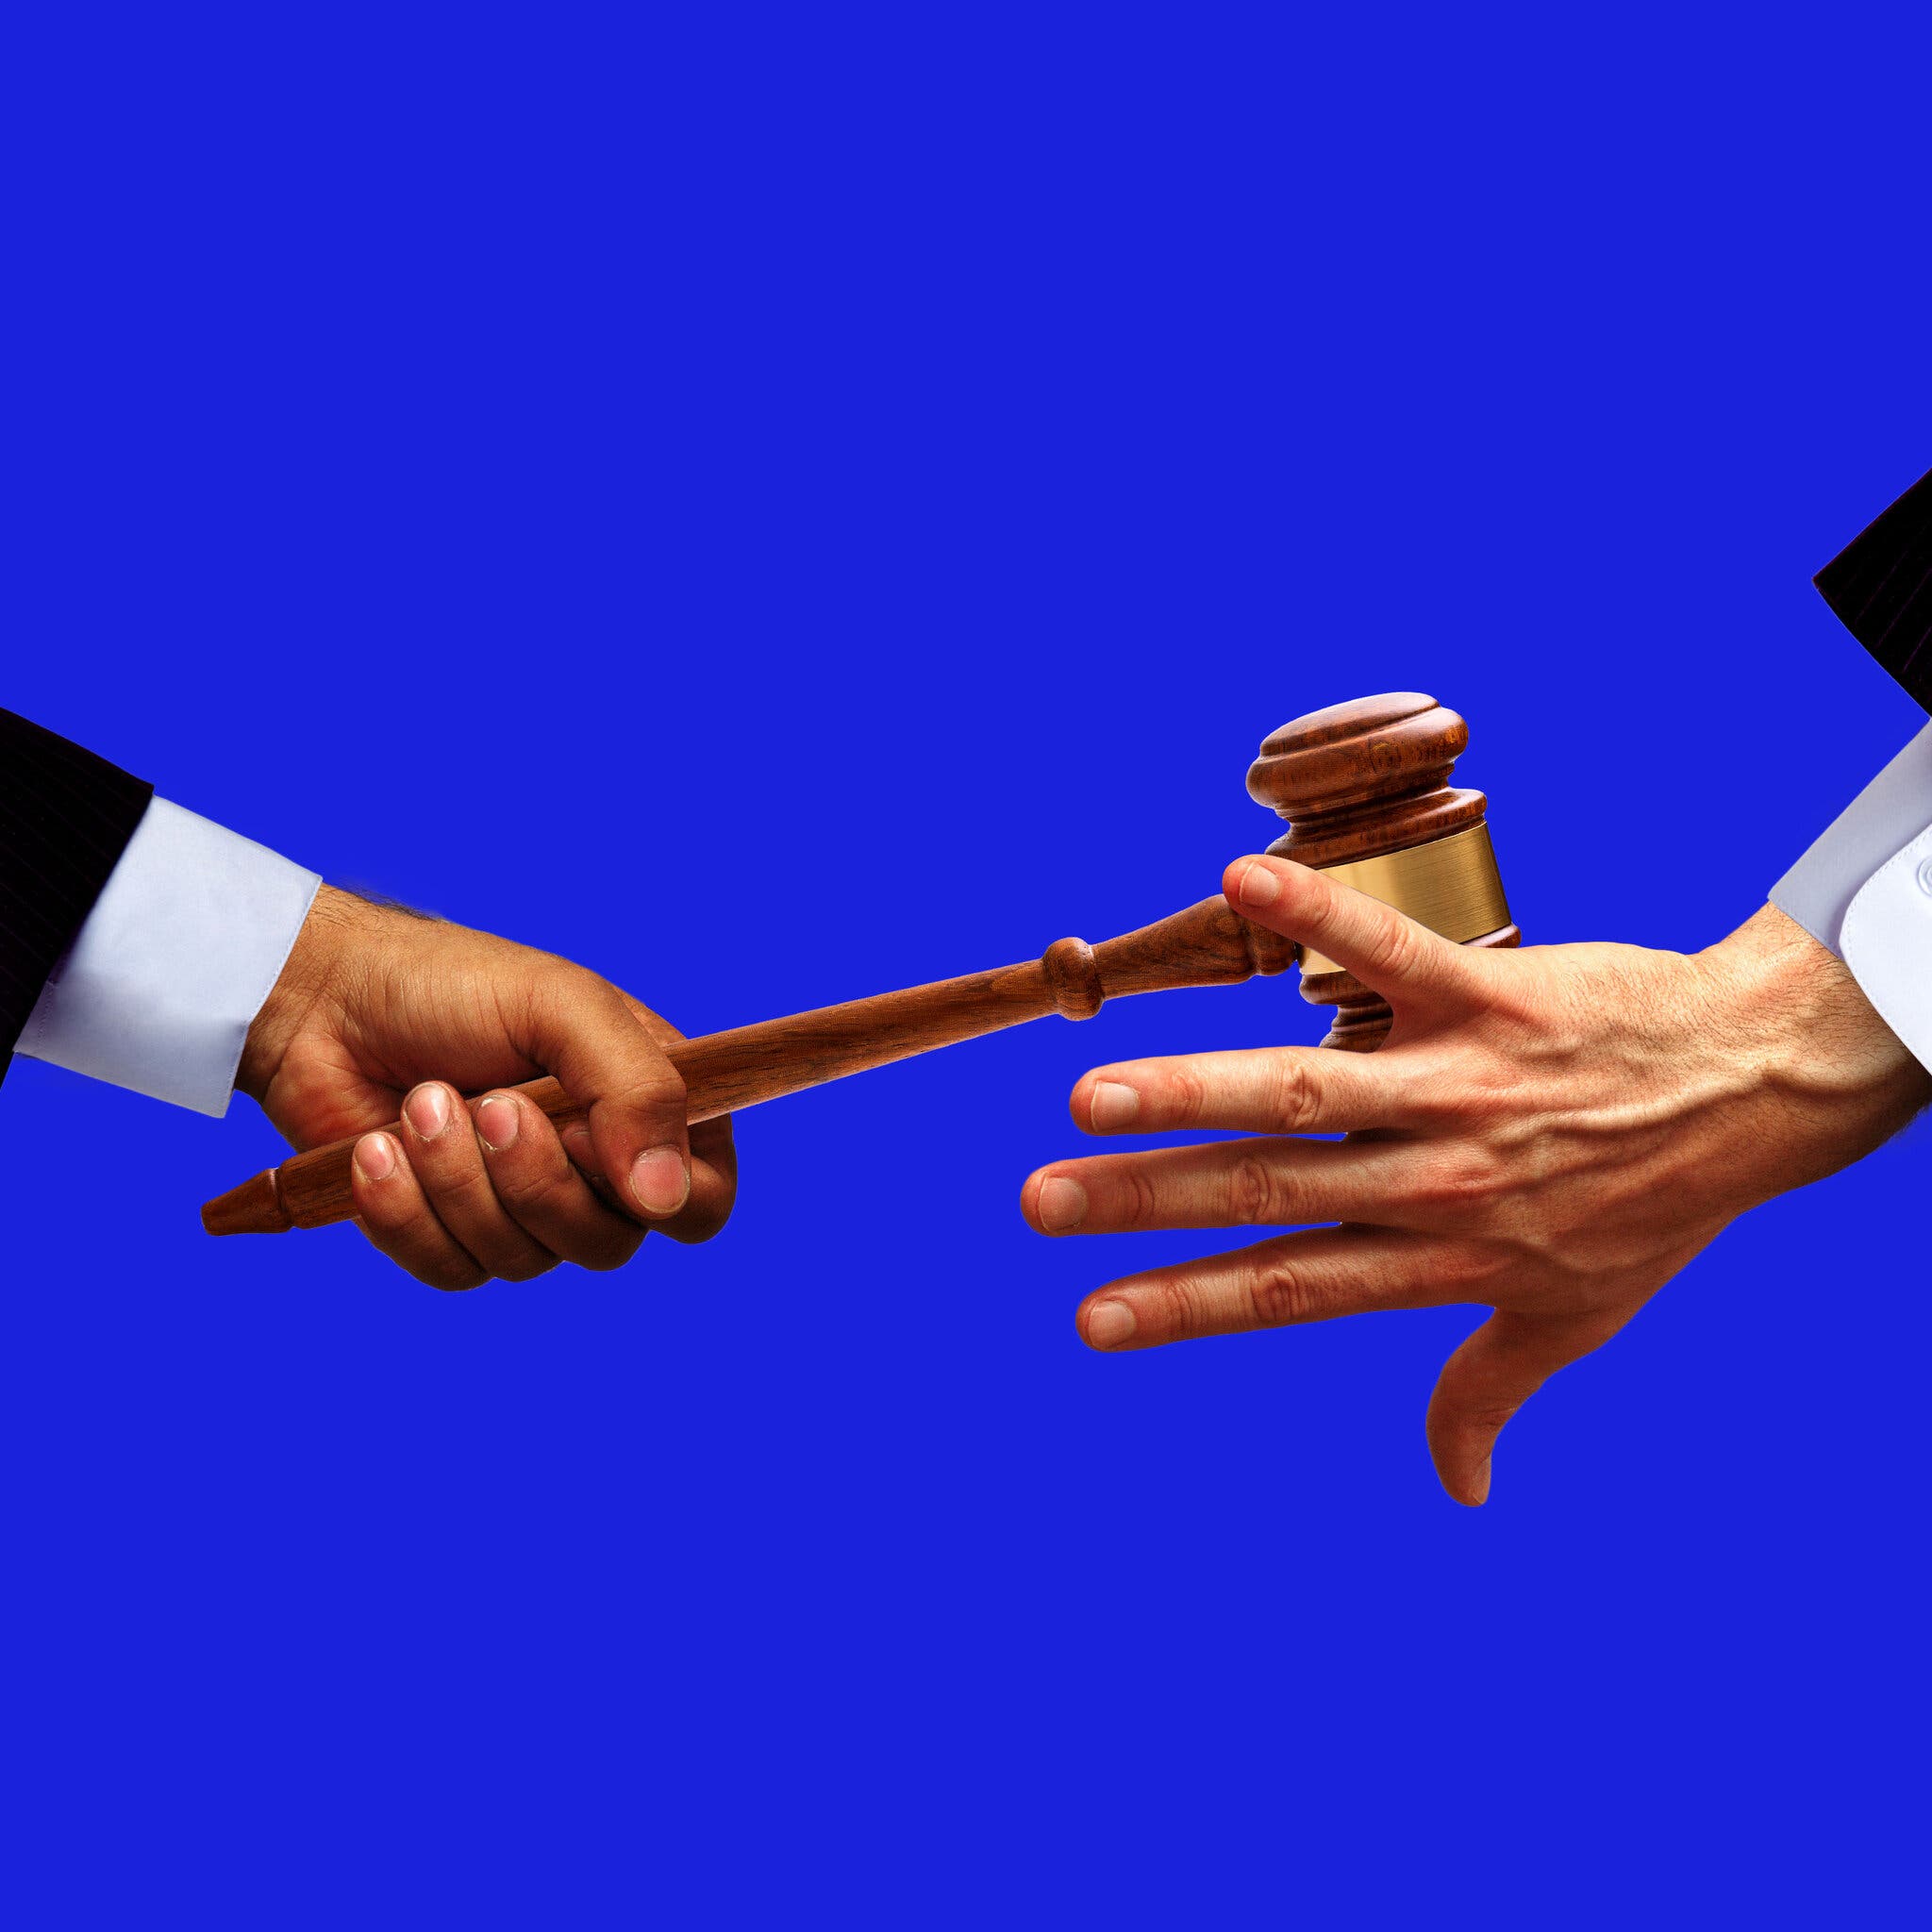 Illustration of gavel being passed between pair of hands, credit Sam Whitney, The New York Times